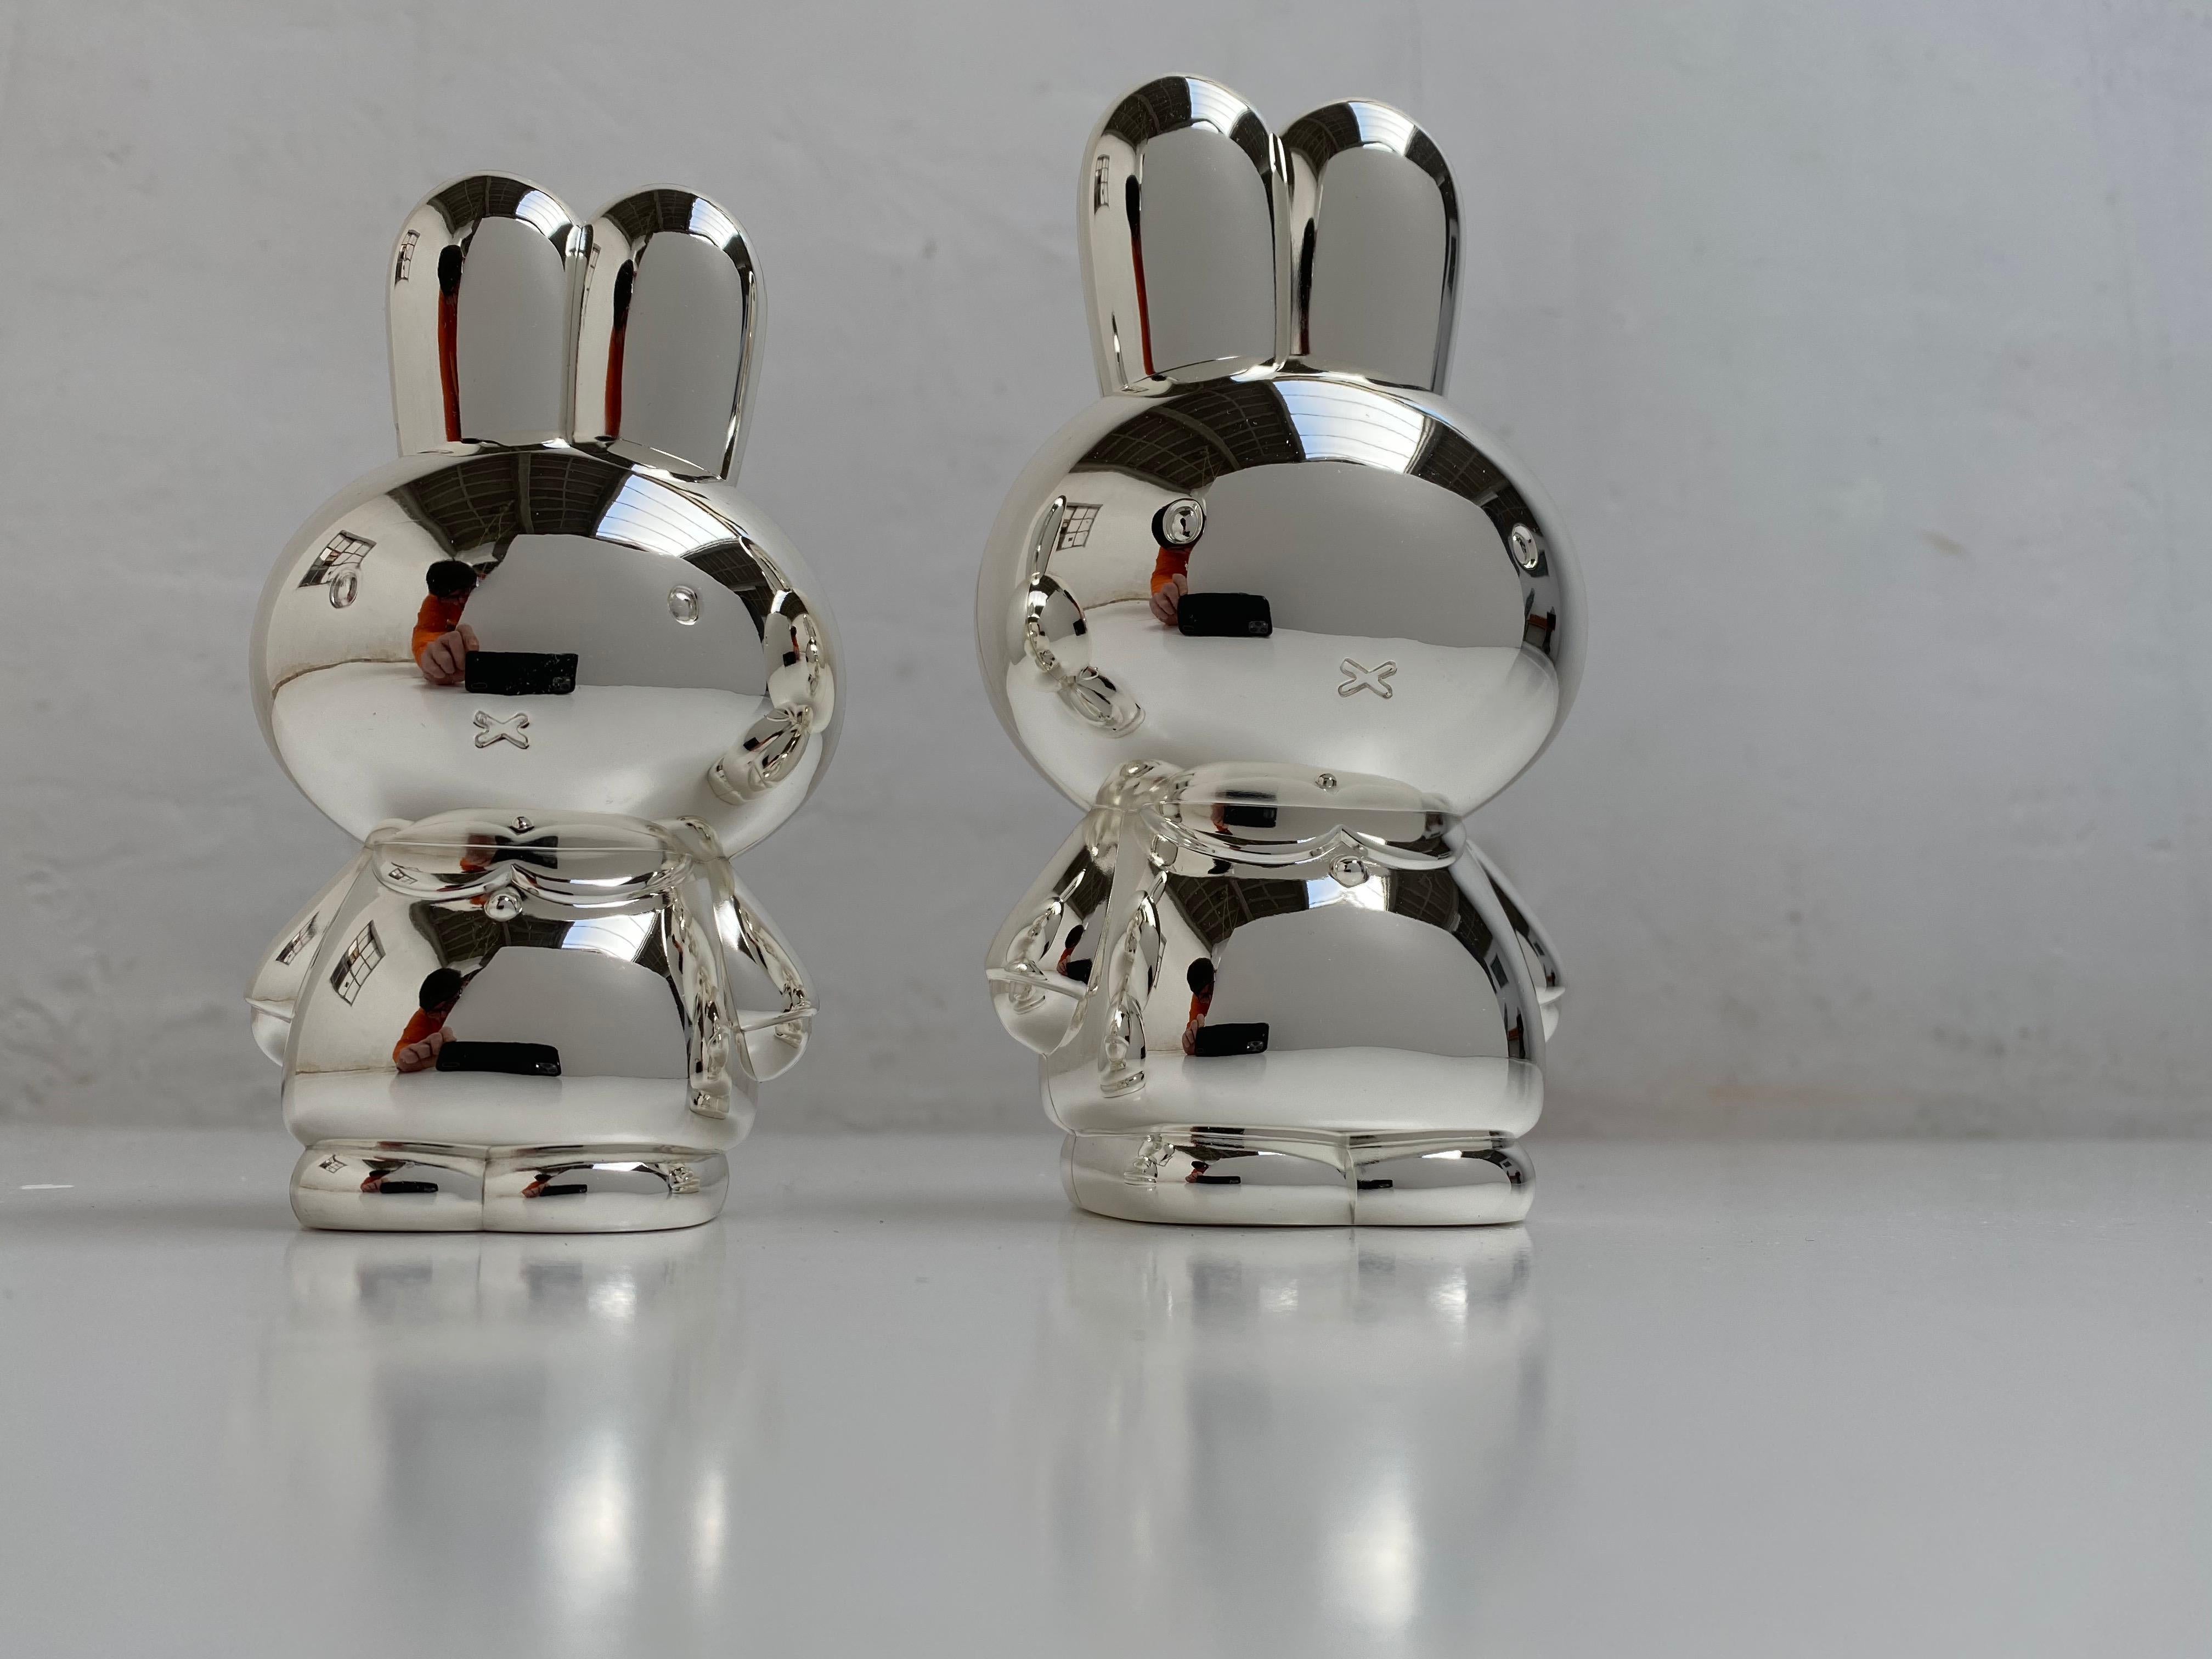 Mid-Century Modern Miffy Silver Plated Money Bank by Dutch Illustrator and Writer Dick Bruna, 1955